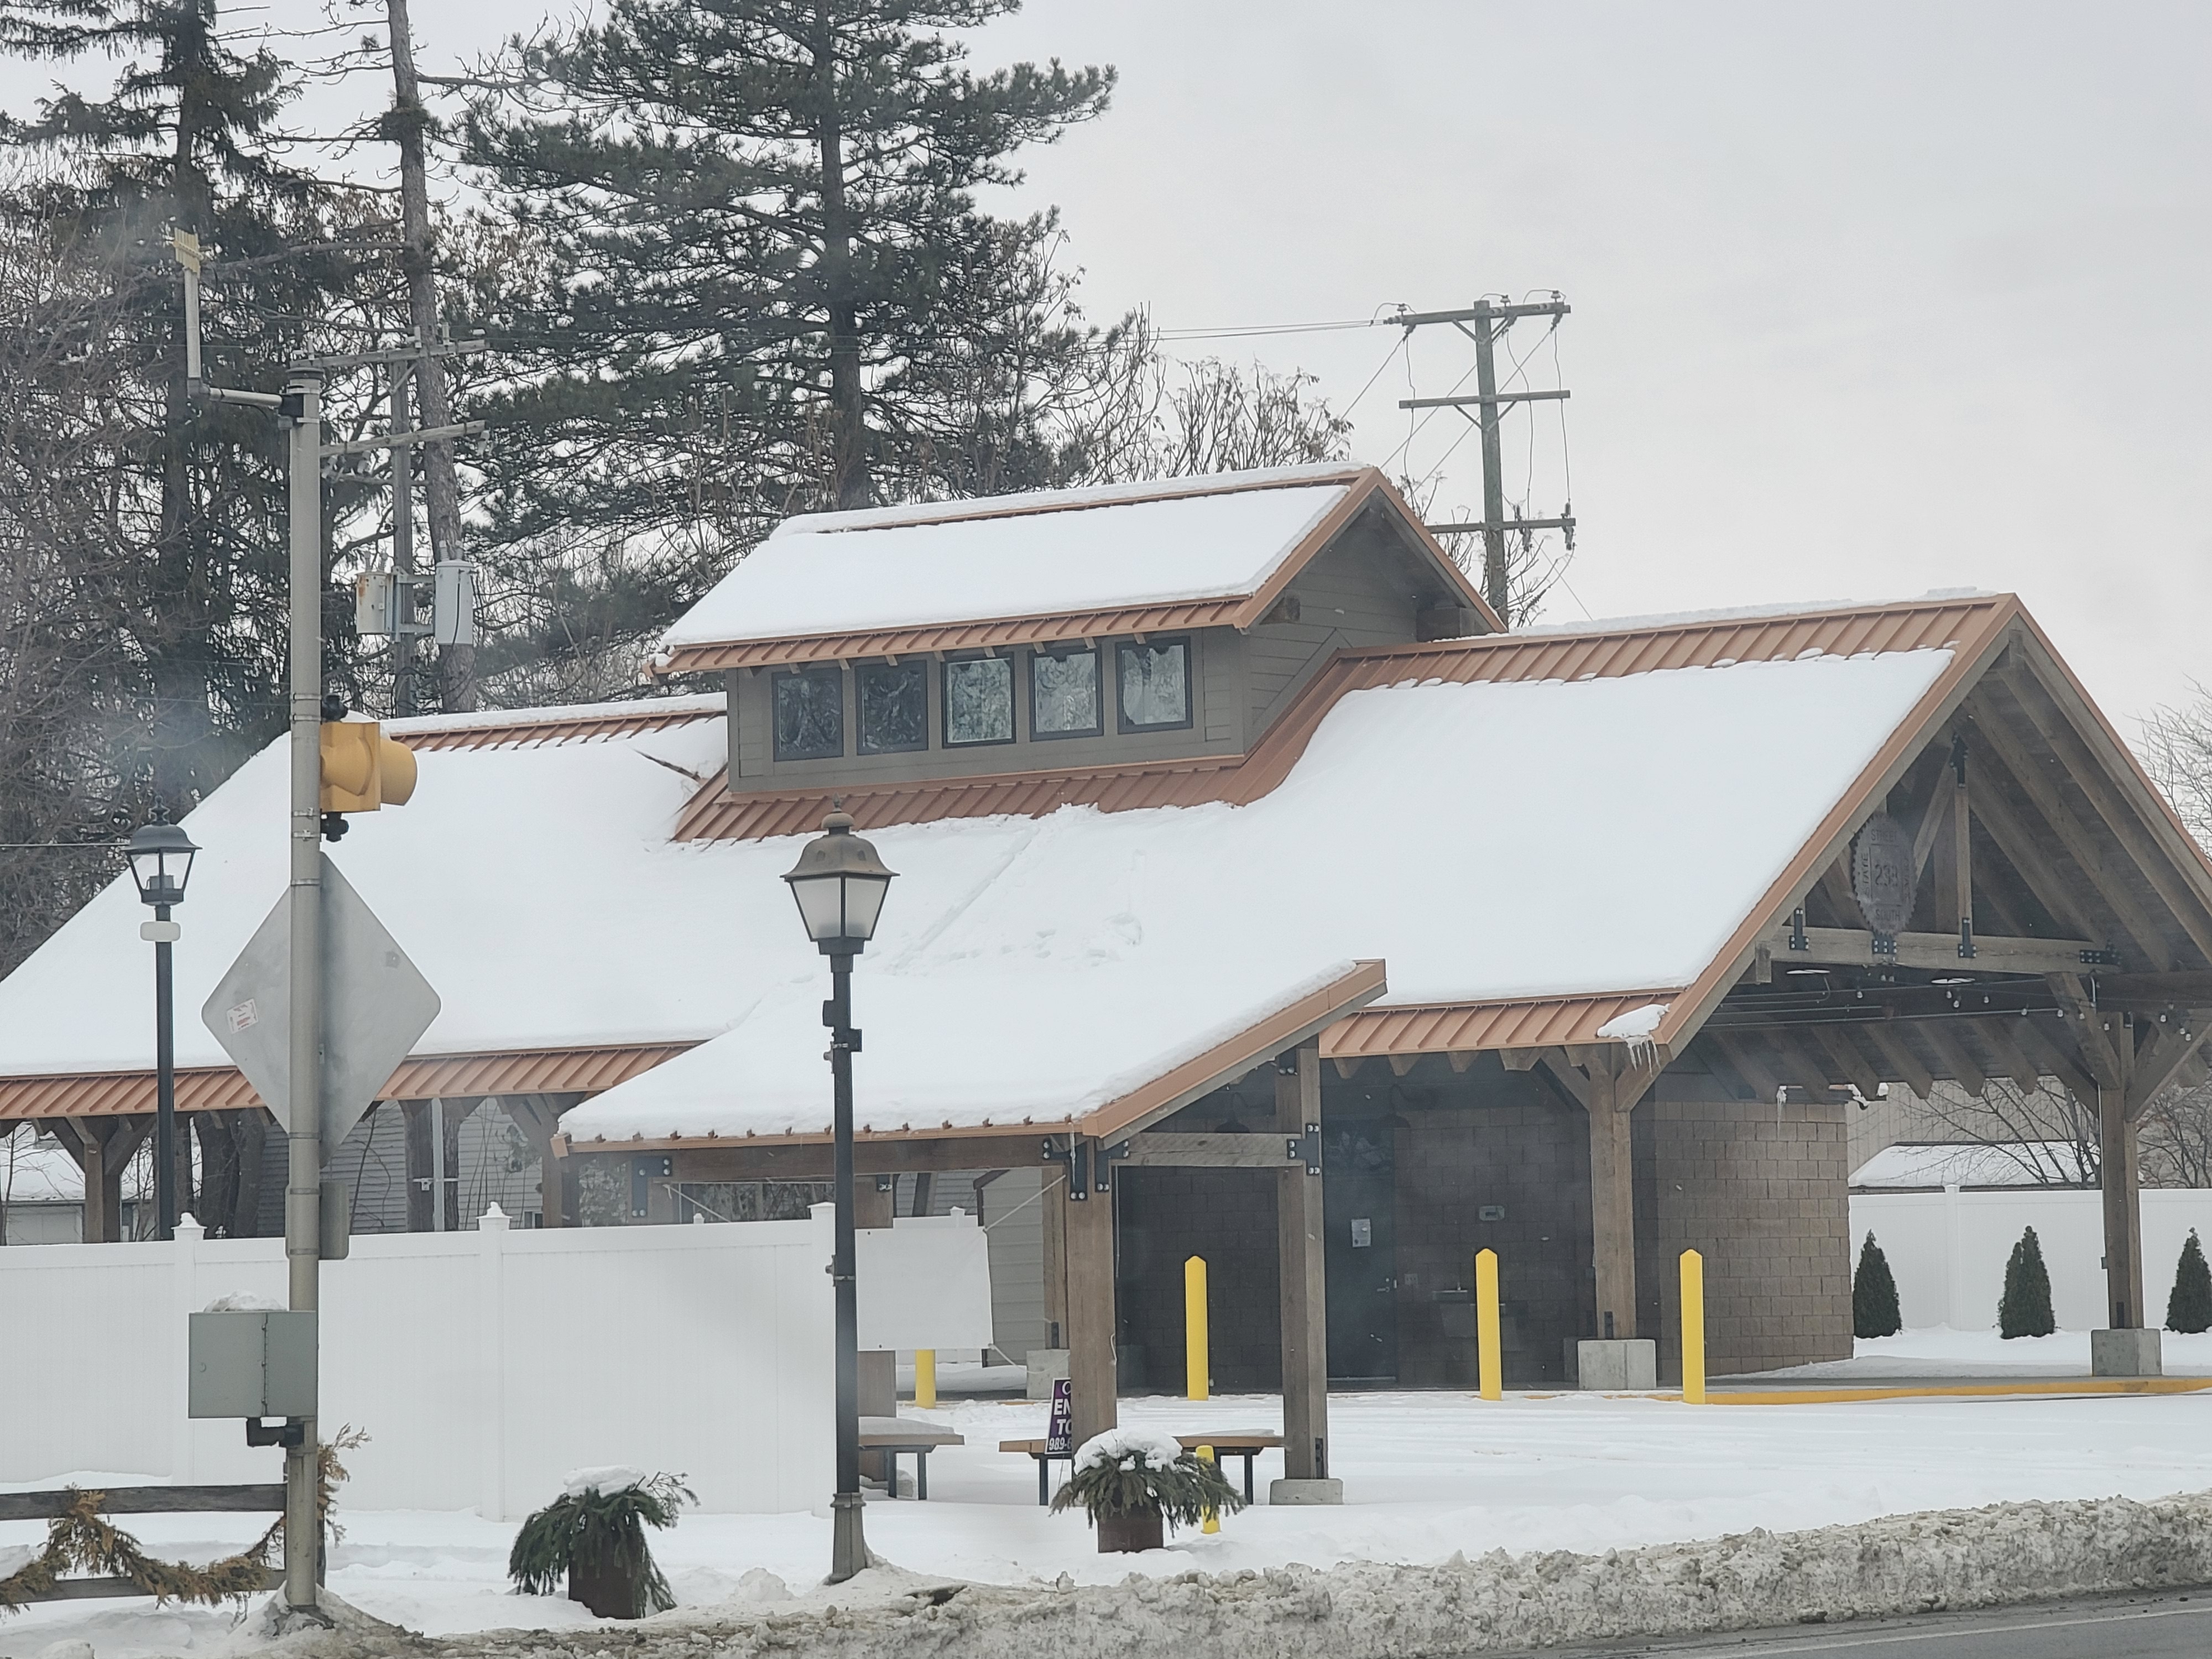 brick building with metal roof covered in snow